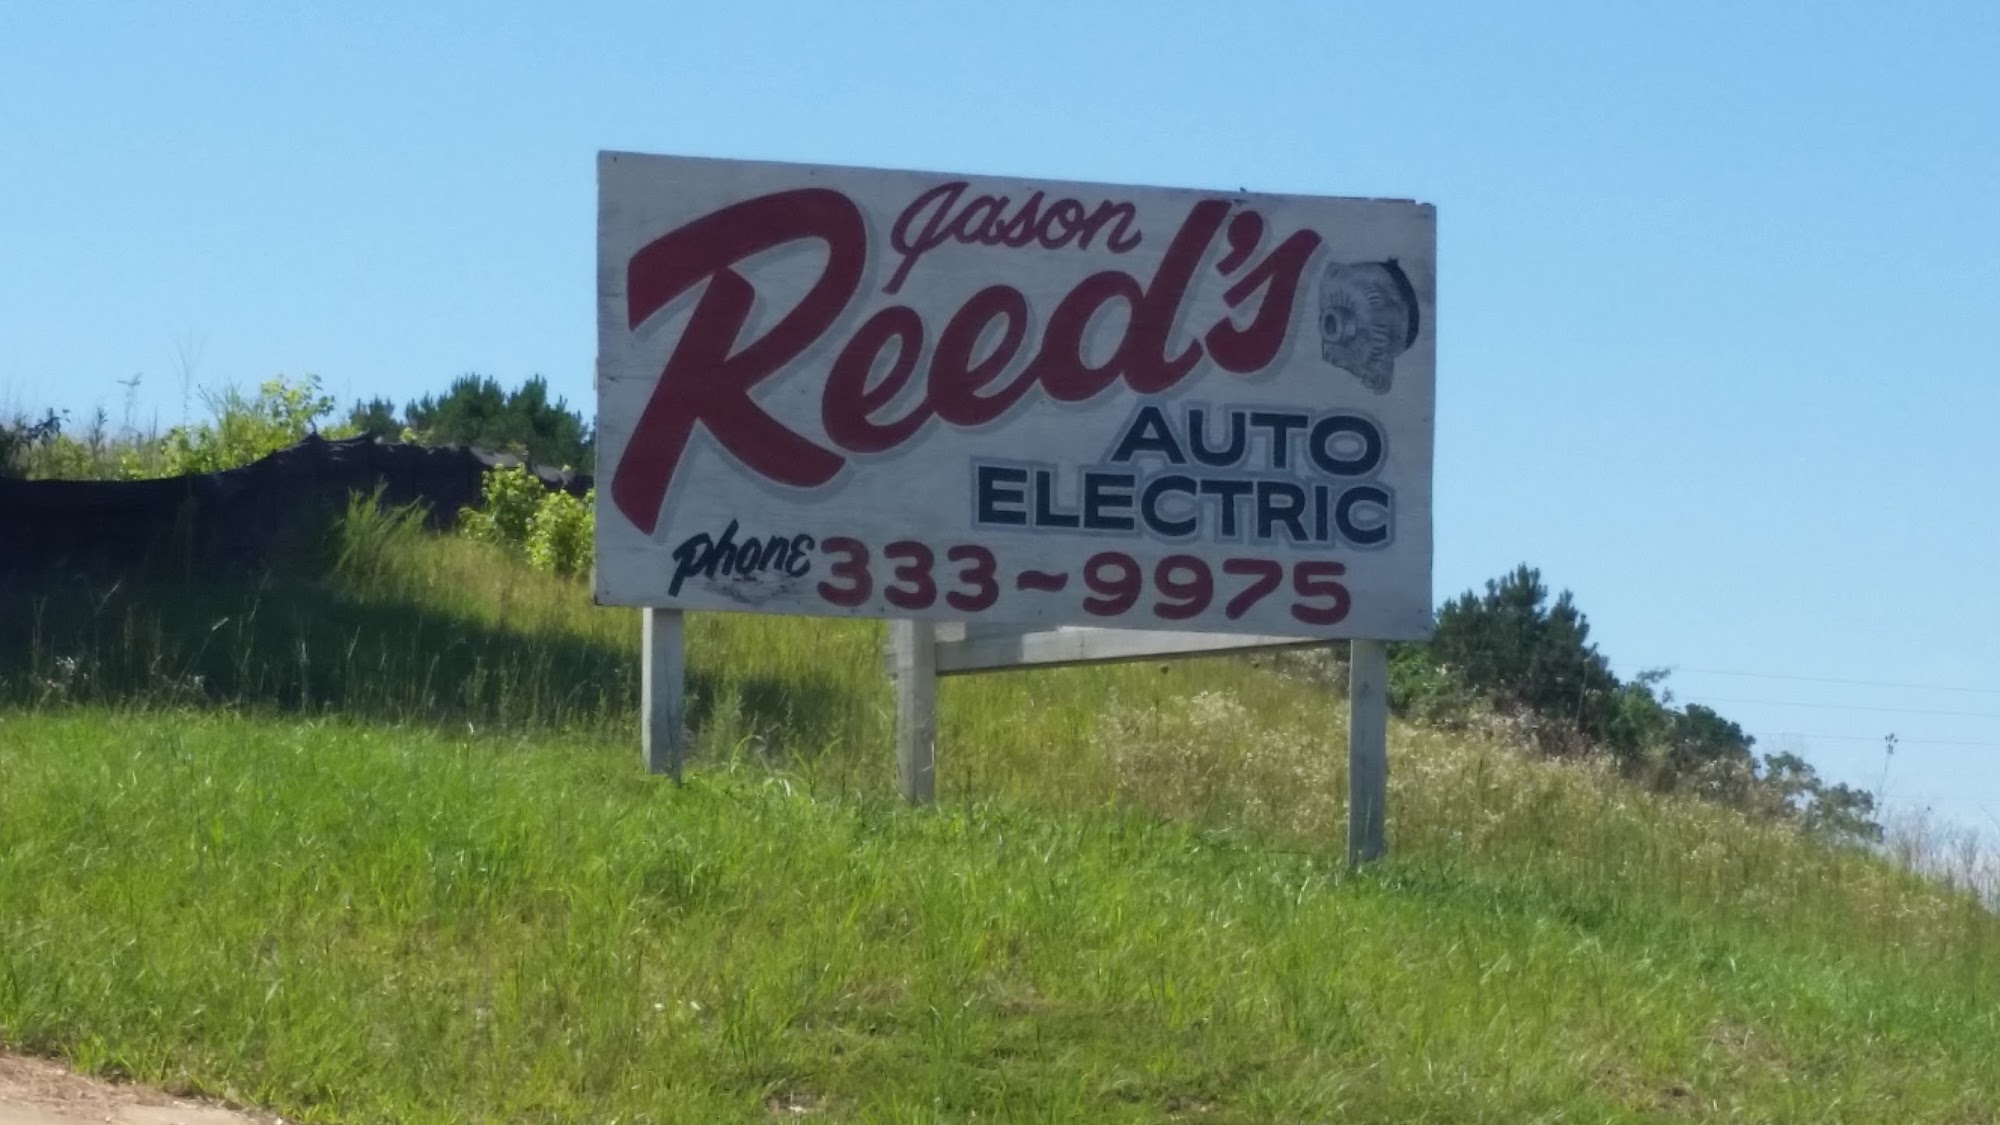 Reed's Automotive Electric